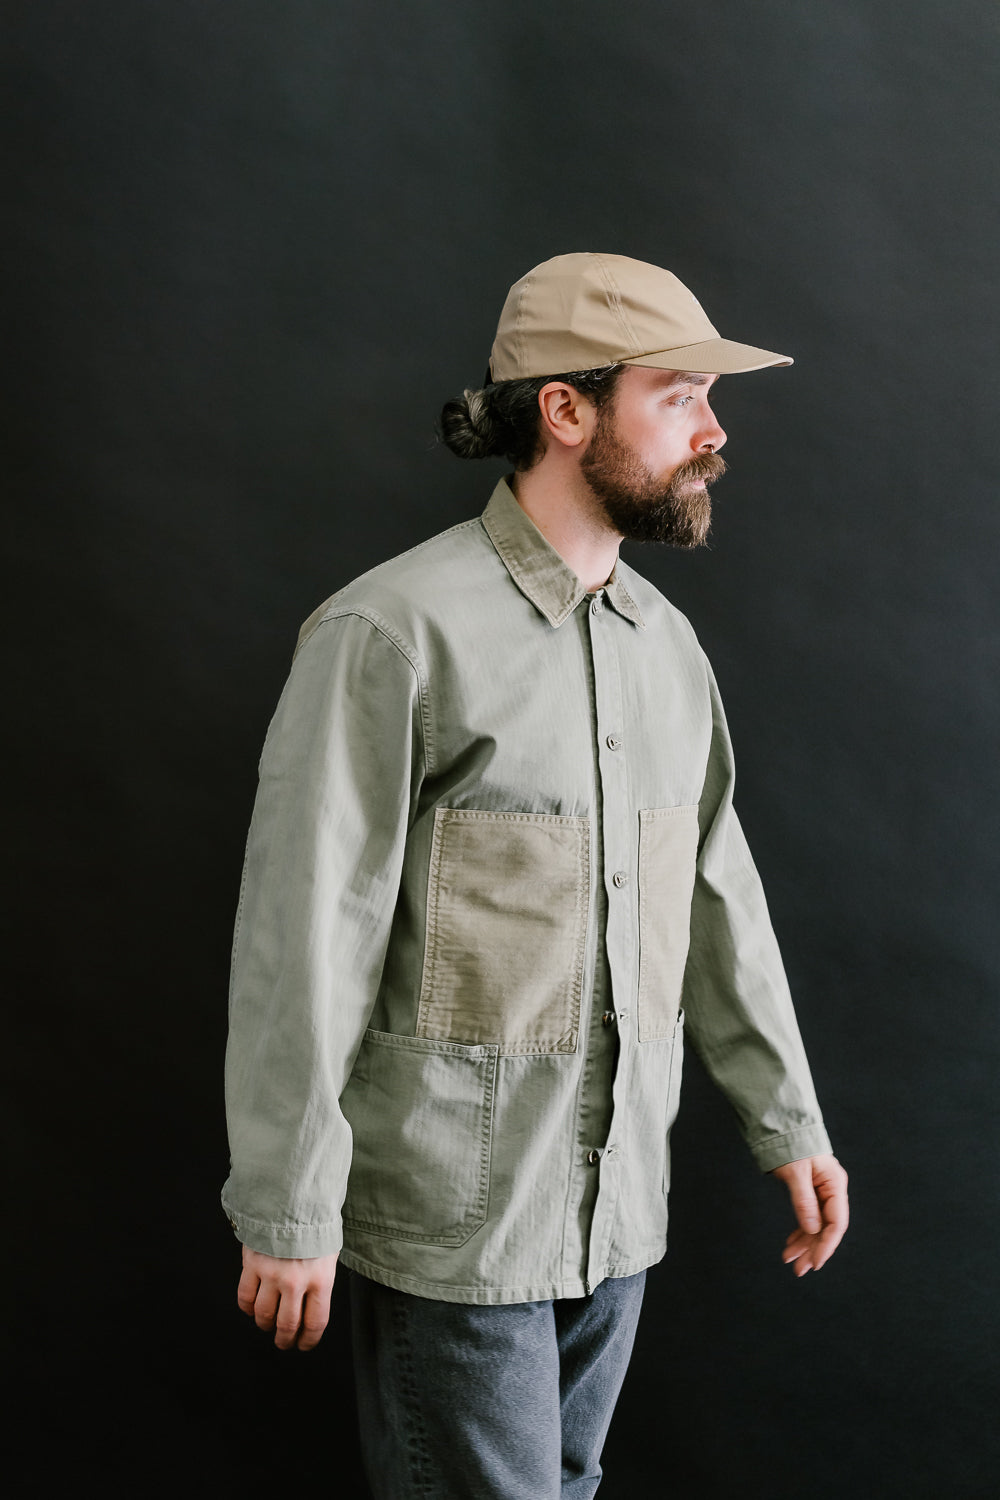 01-6120-16 - Utility Coverall Mismatched Herringbone - Washed Green